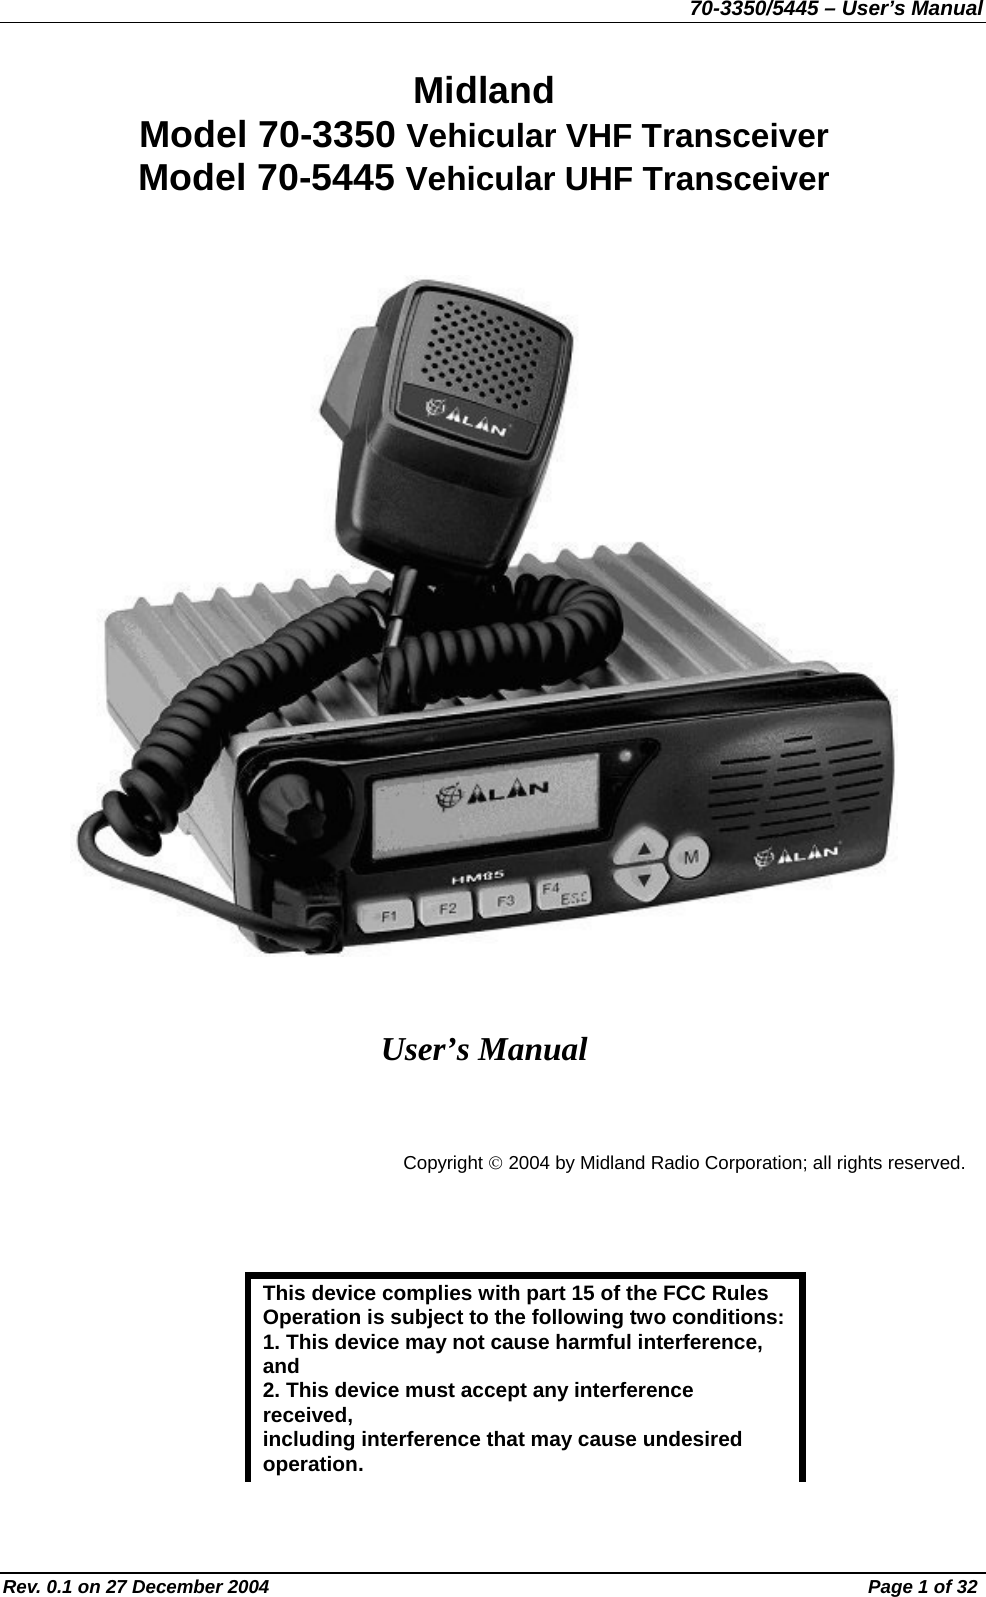 70-3350/5445 – User’s Manual Midland  Model 70-3350 Vehicular VHF Transceiver Model 70-5445 Vehicular UHF Transceiver       User’s Manual   Copyright © 2004 by Midland Radio Corporation; all rights reserved.   This device complies with part 15 of the FCC Rules Operation is subject to the following two conditions: 1. This device may not cause harmful interference, and 2. This device must accept any interference received, including interference that may cause undesired operation. Rev. 0.1 on 27 December 2004  Page 1 of 32 